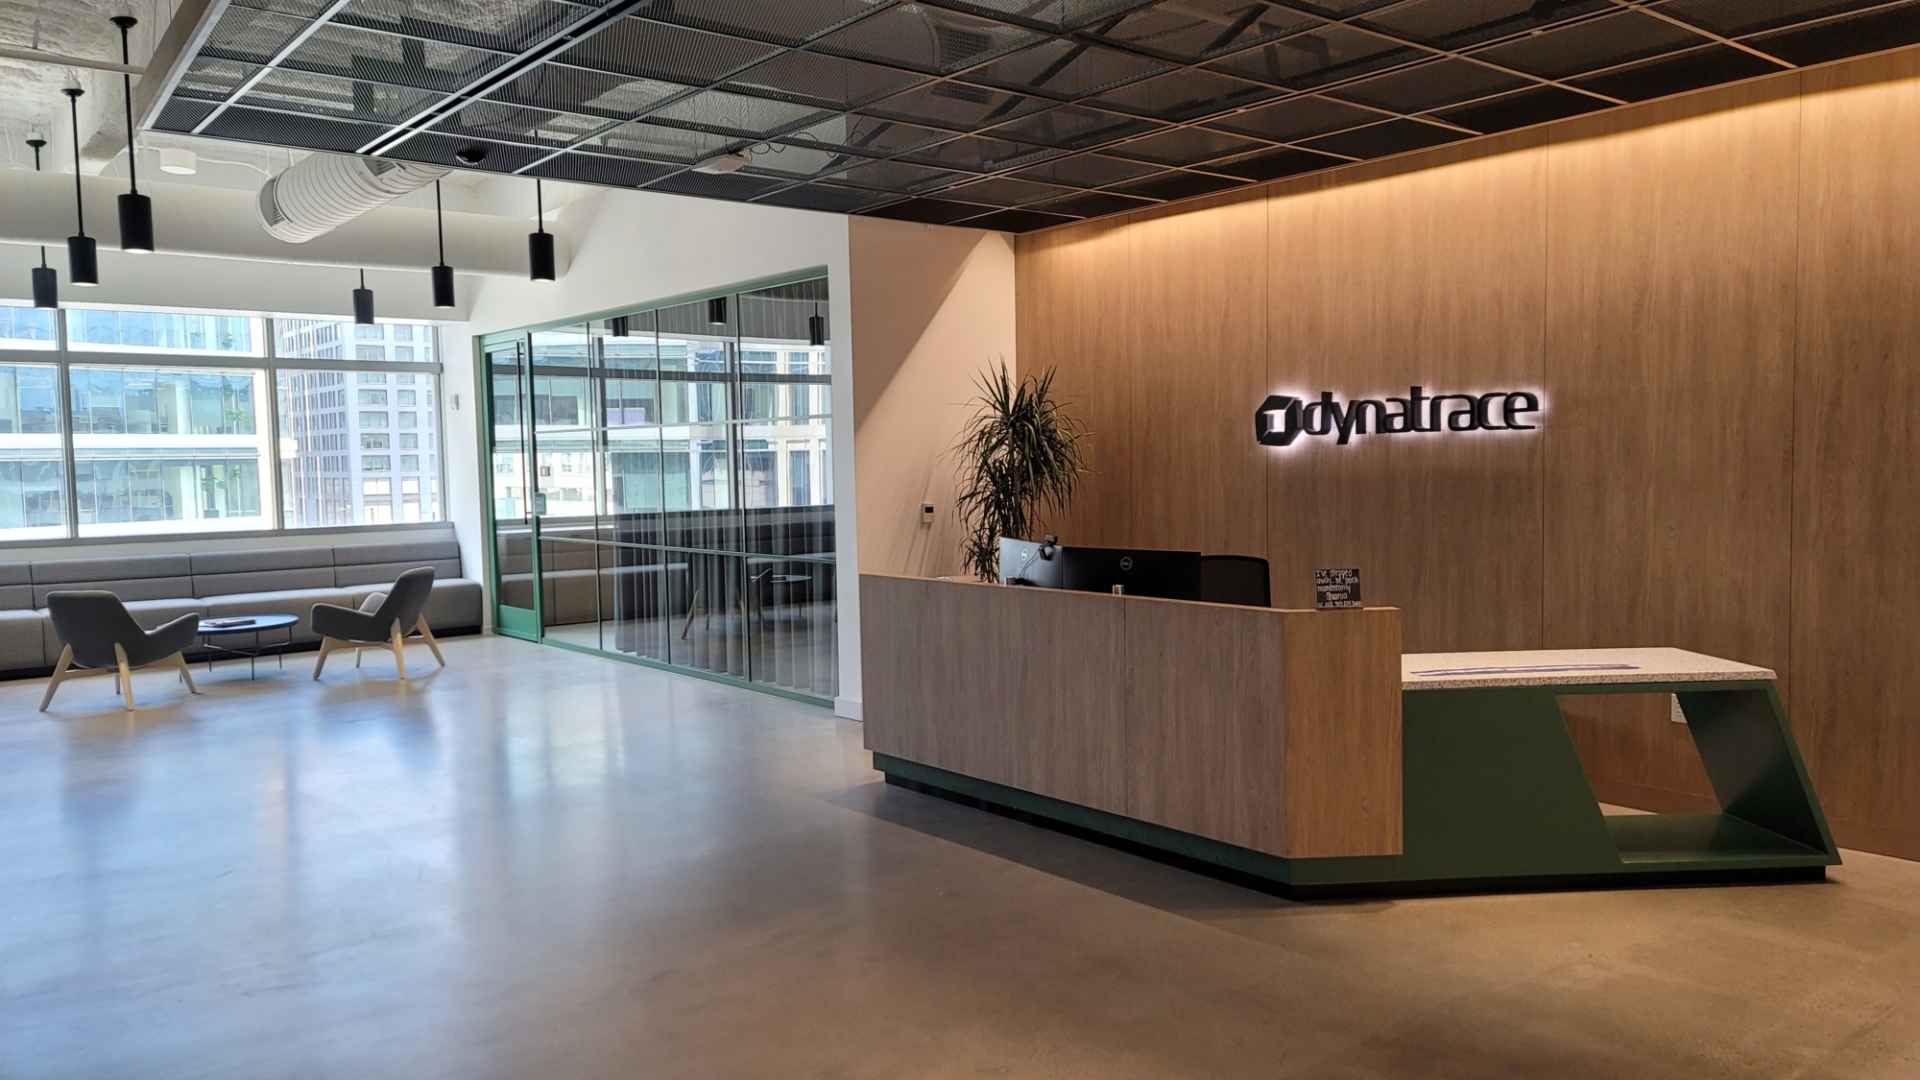 Denver Office Dynatrace Expansion 100 Employees